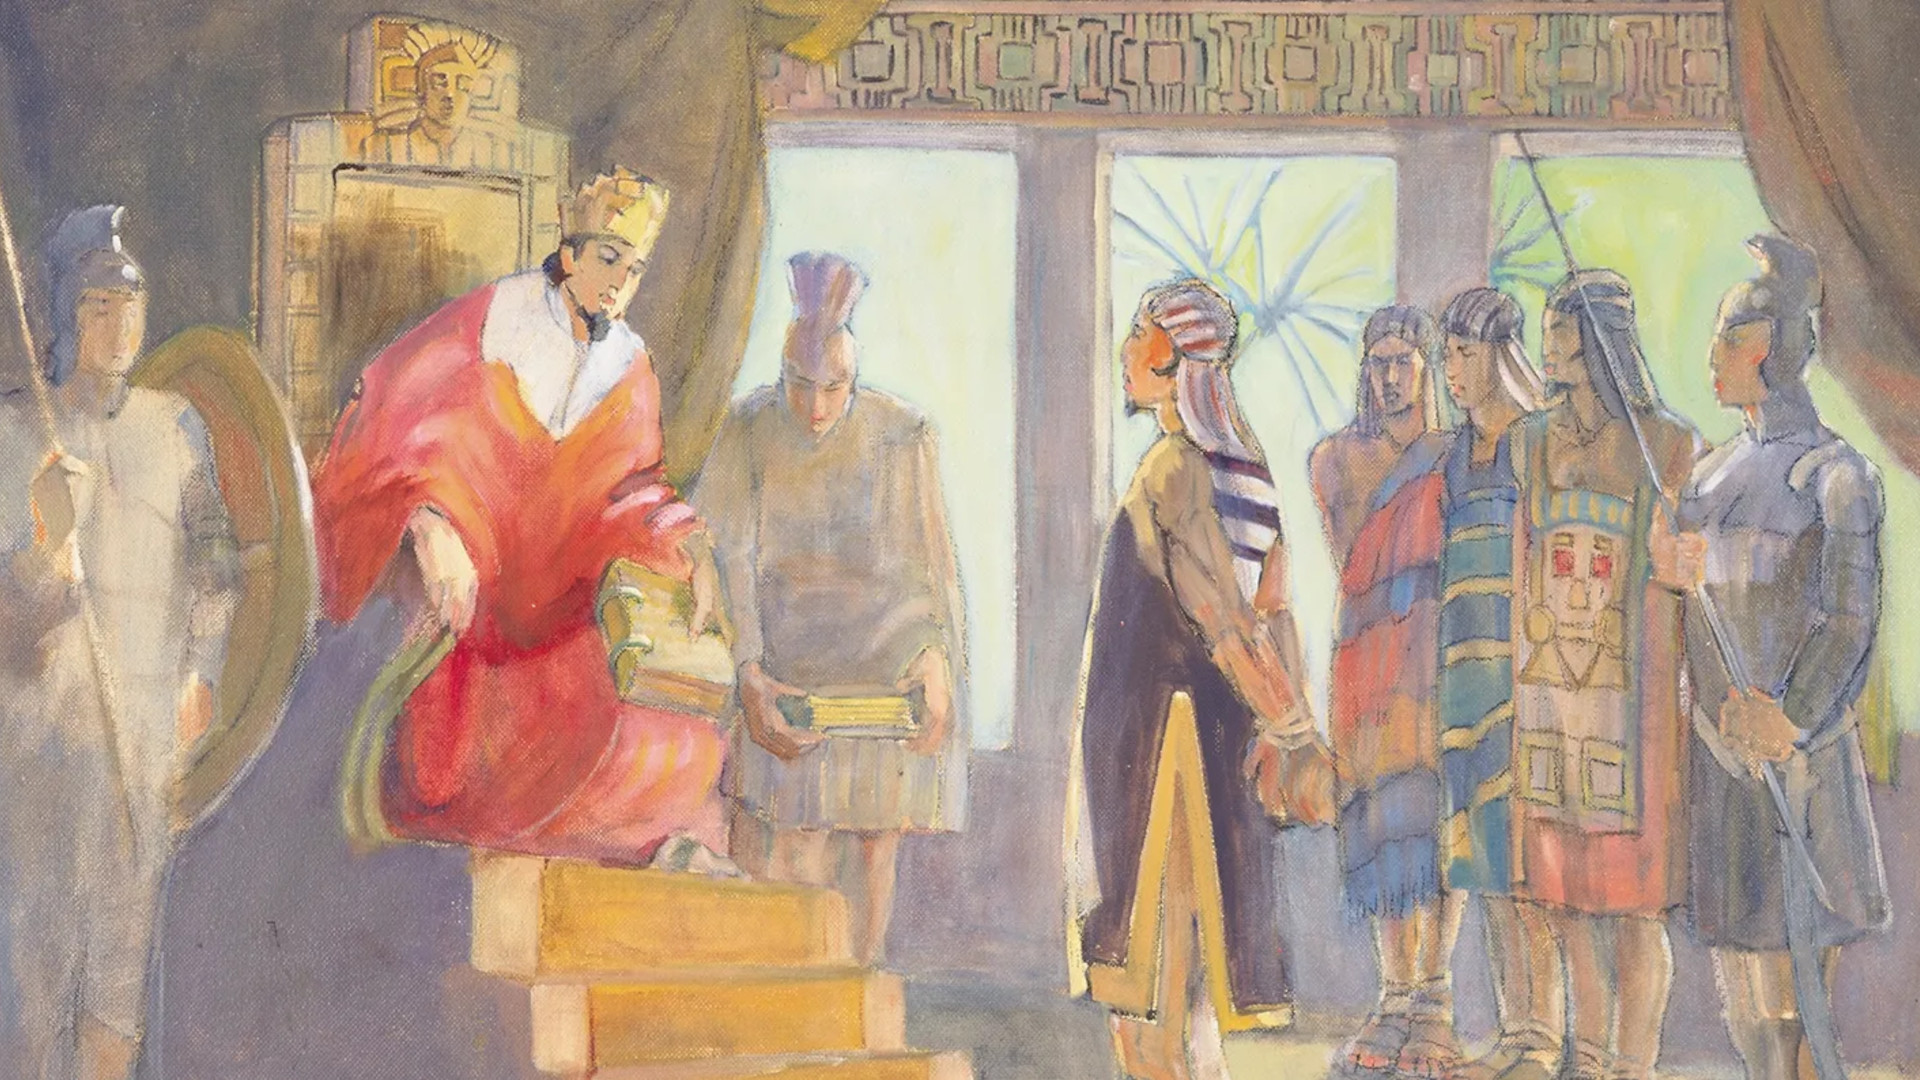 Minerva Teichert (1888–1976), “Ammon before King Limhi,” 1949–1951, oil on masonite, 35 15/16 × 48 inches. Brigham Young University Museum of Art, 1969.